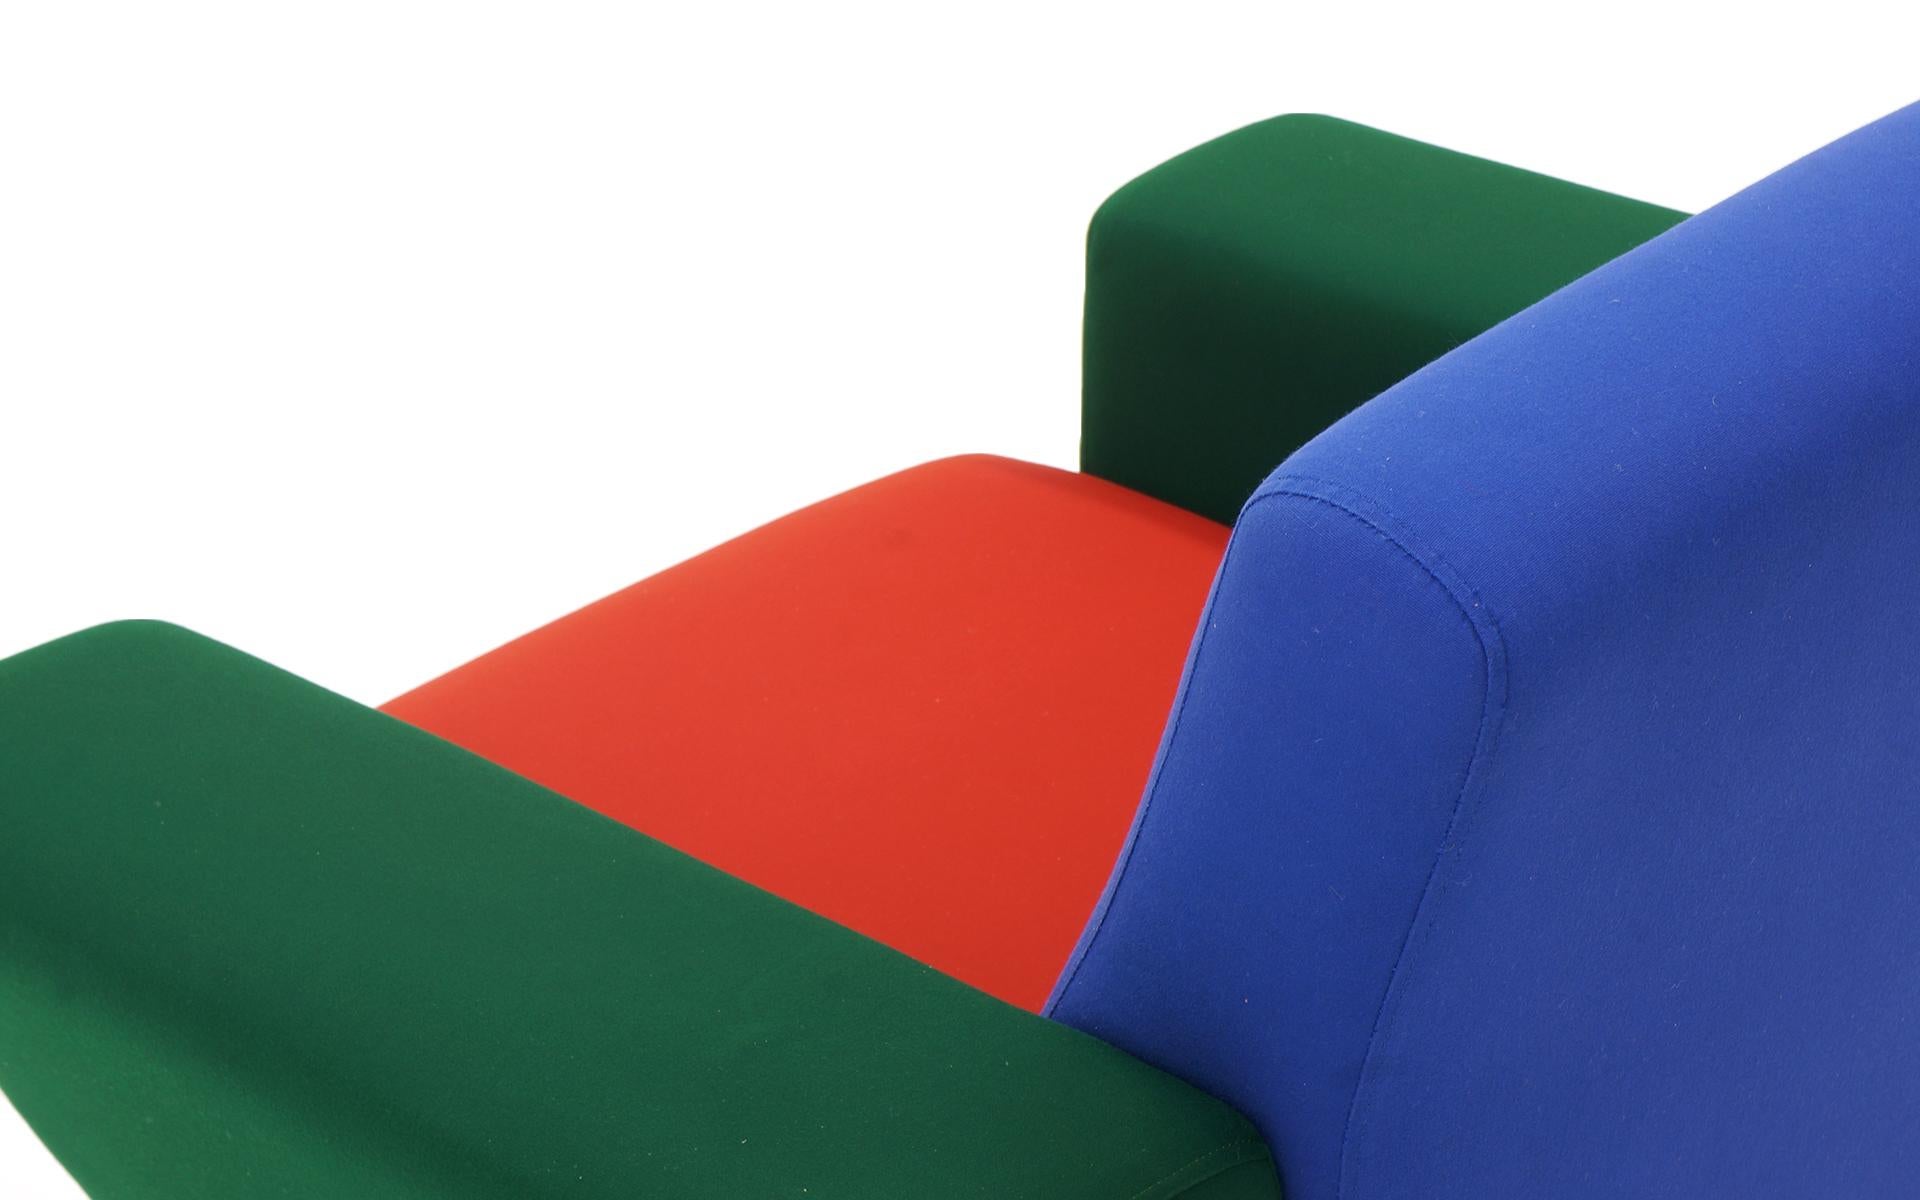 Enameled Westside Lounge Chair by Ettore Sottsass for Knoll, 1983, Expertly Reupholstered